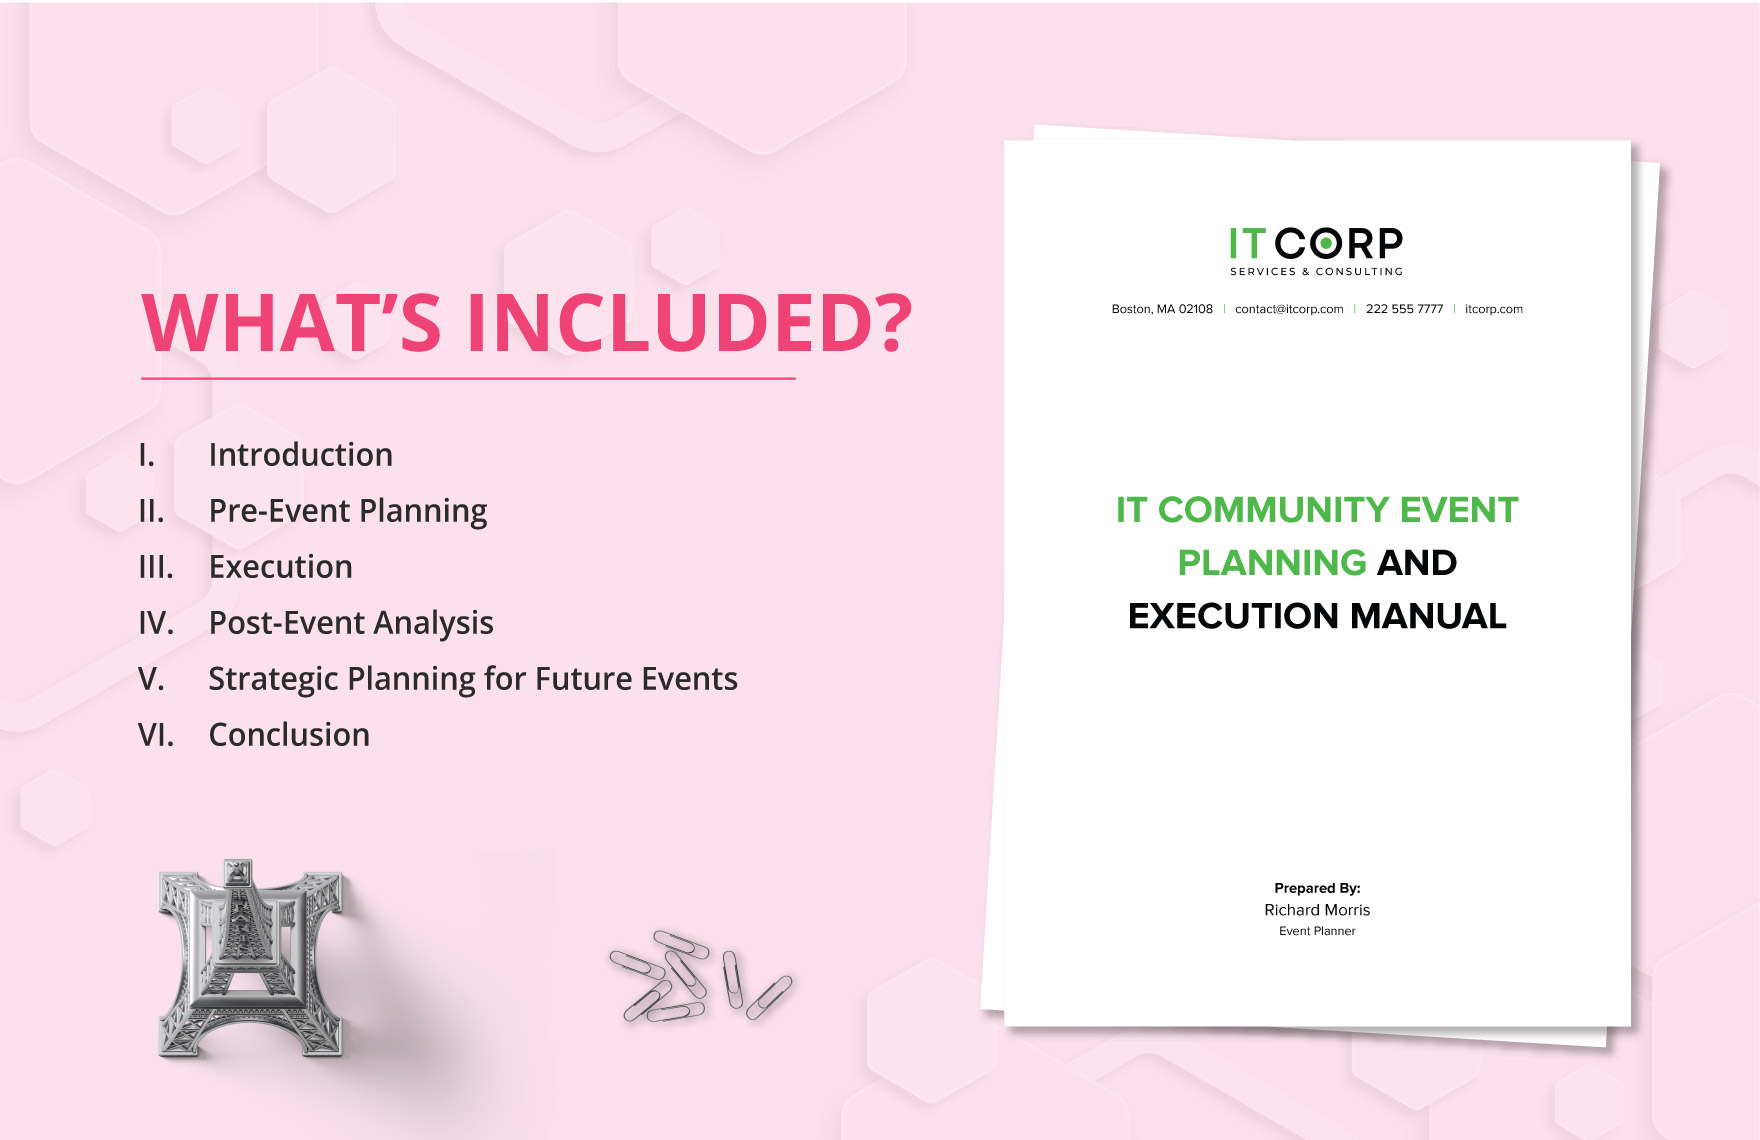 IT Community Event Planning and Execution Manual Template